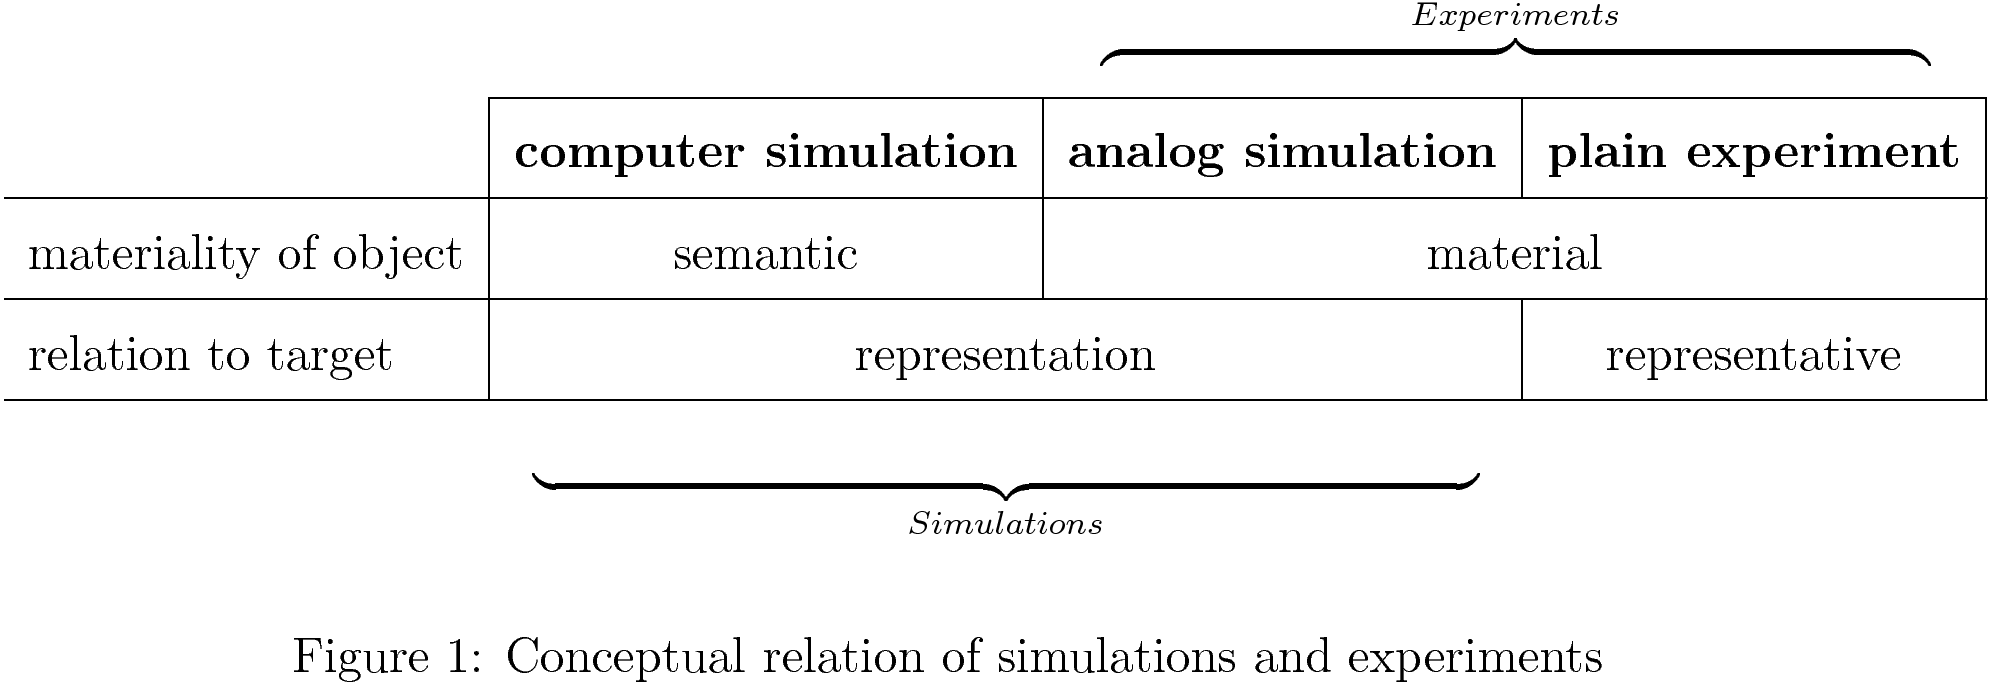 [image: Figure_Simulations_Experiments.png]